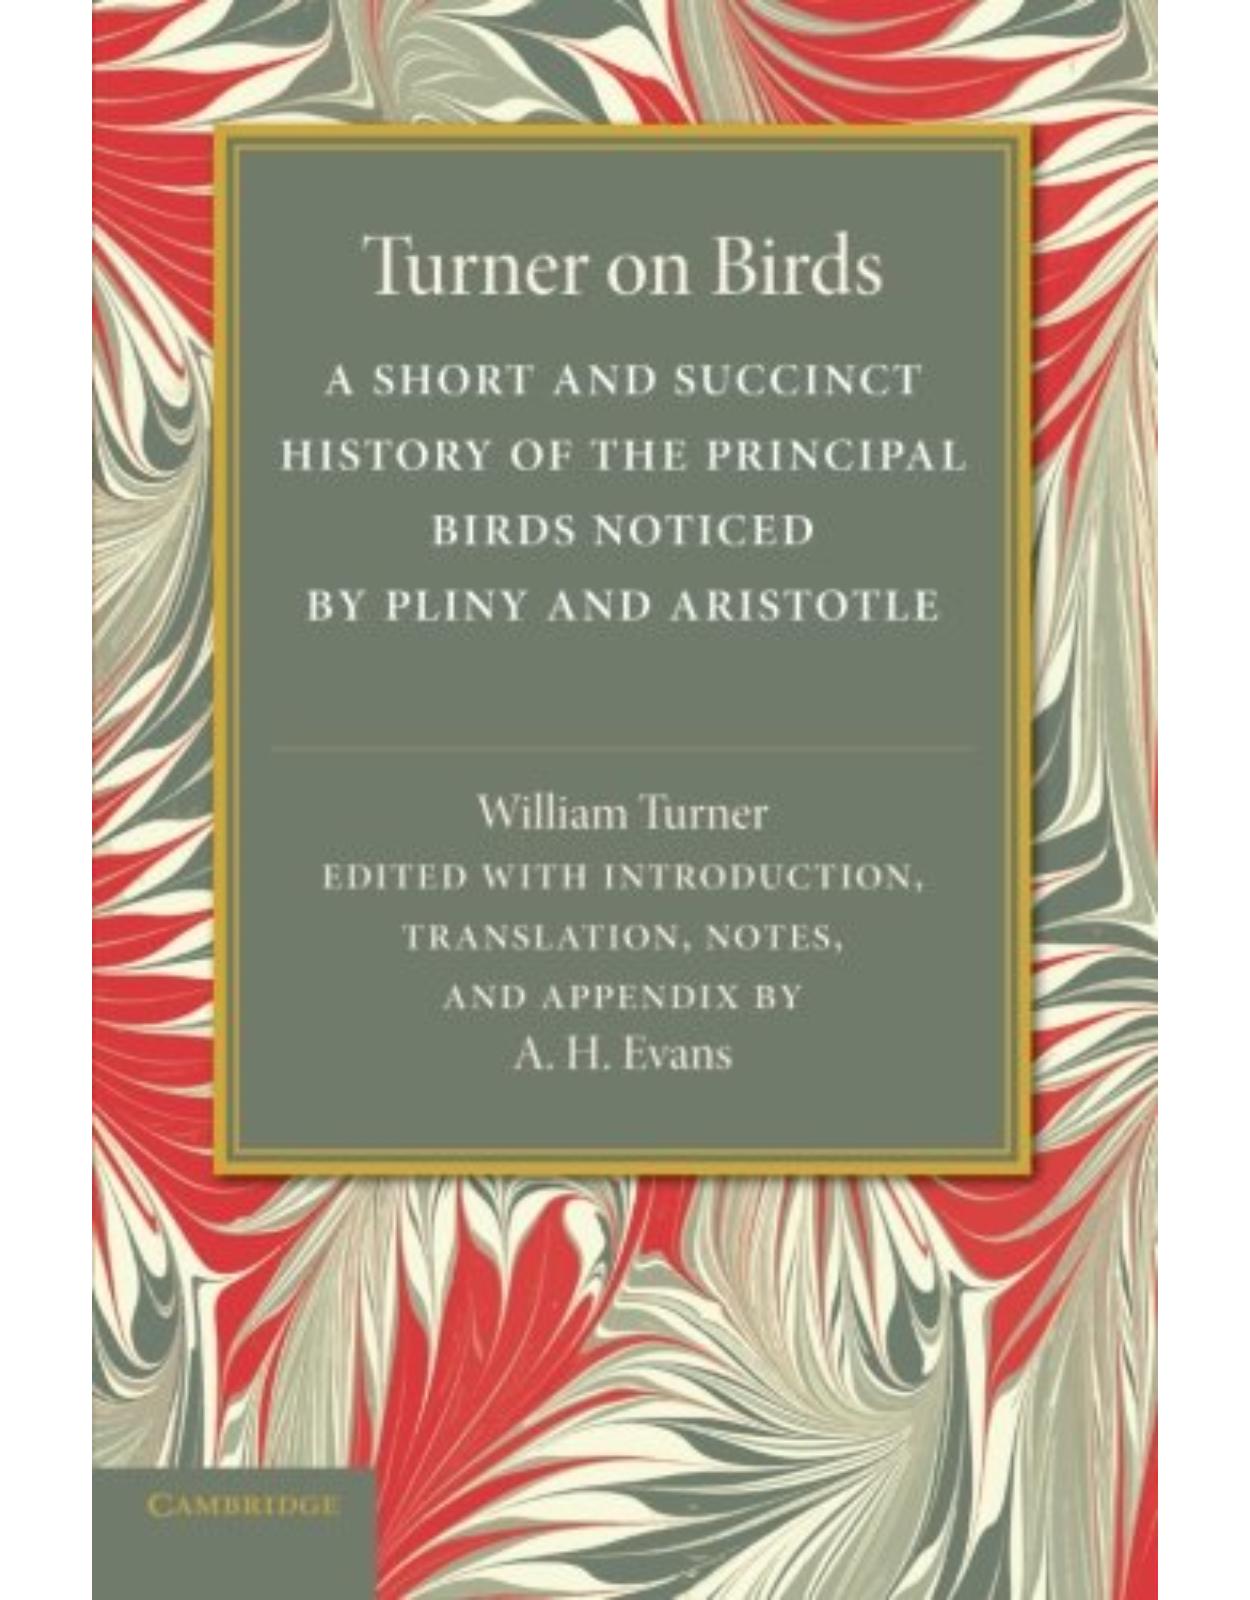 Turner on Birds: A Short and Succinct History of the Principal Birds Noticed by Pliny and Aristotle